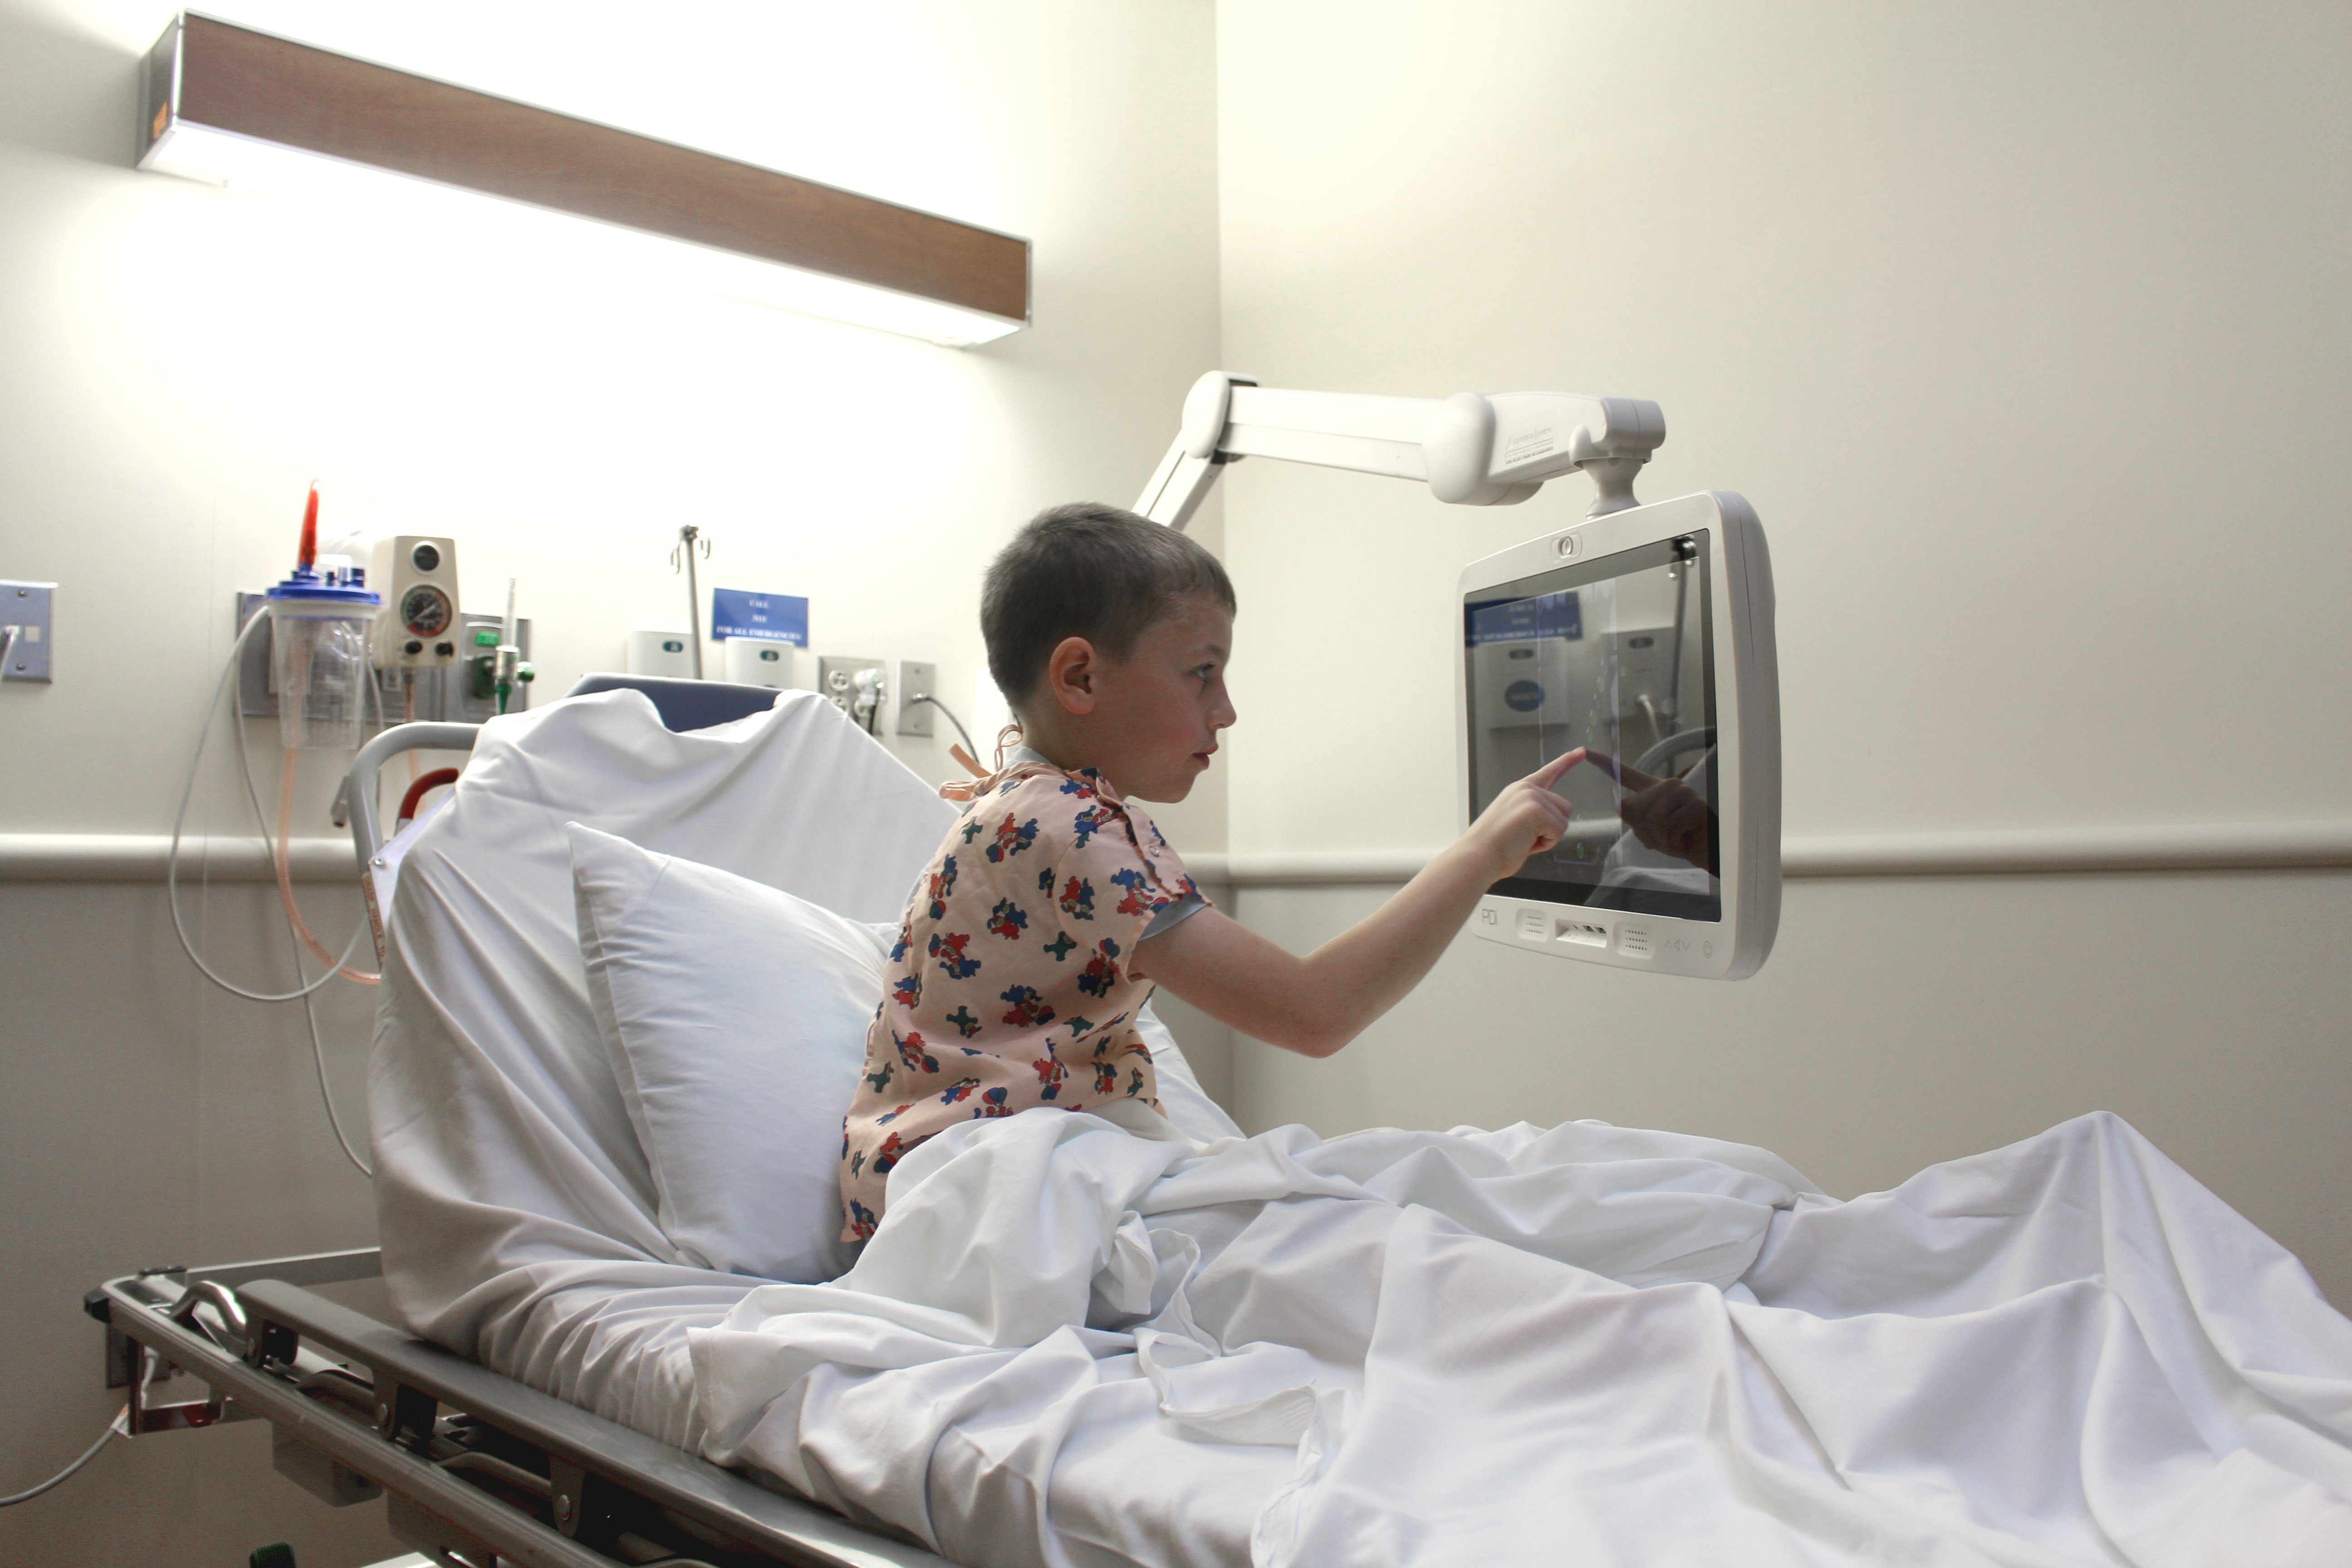 How Arm-mounted Bedside TVs Increase Patient Engagement